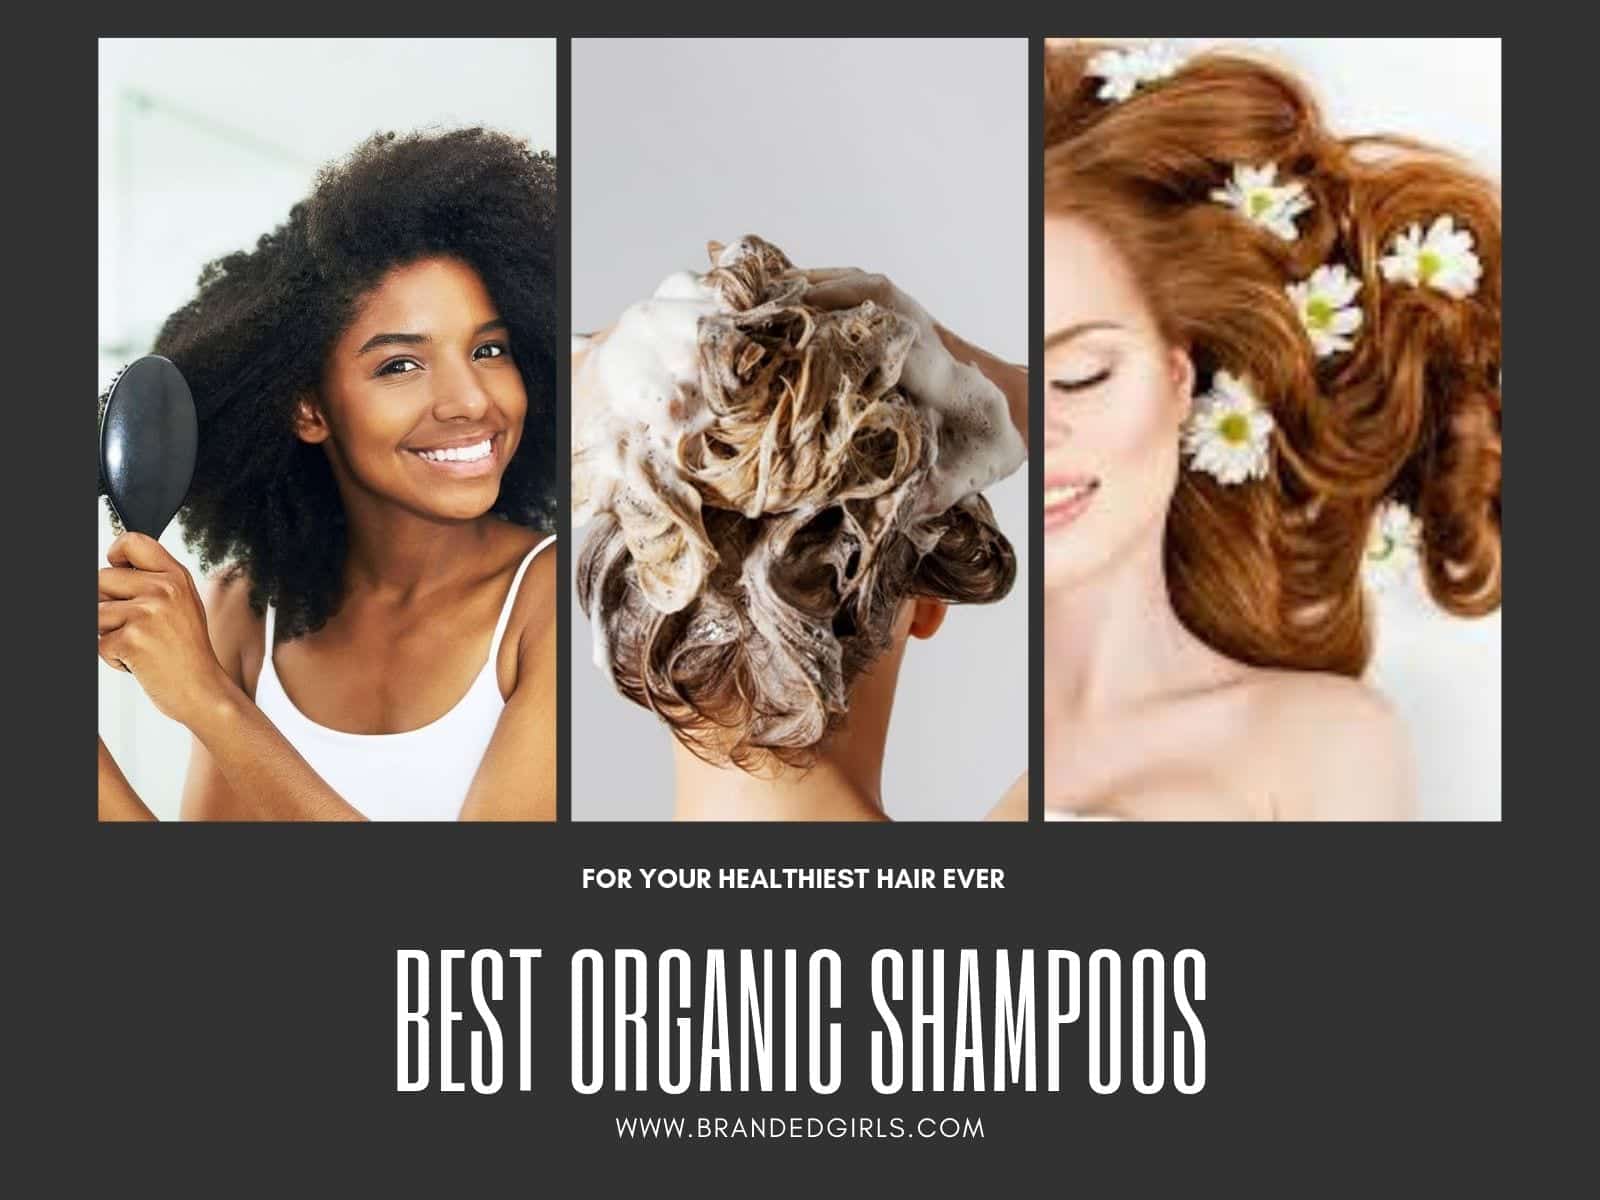 Top 10 Organic Natural Shampoo Brands For All Hair Types